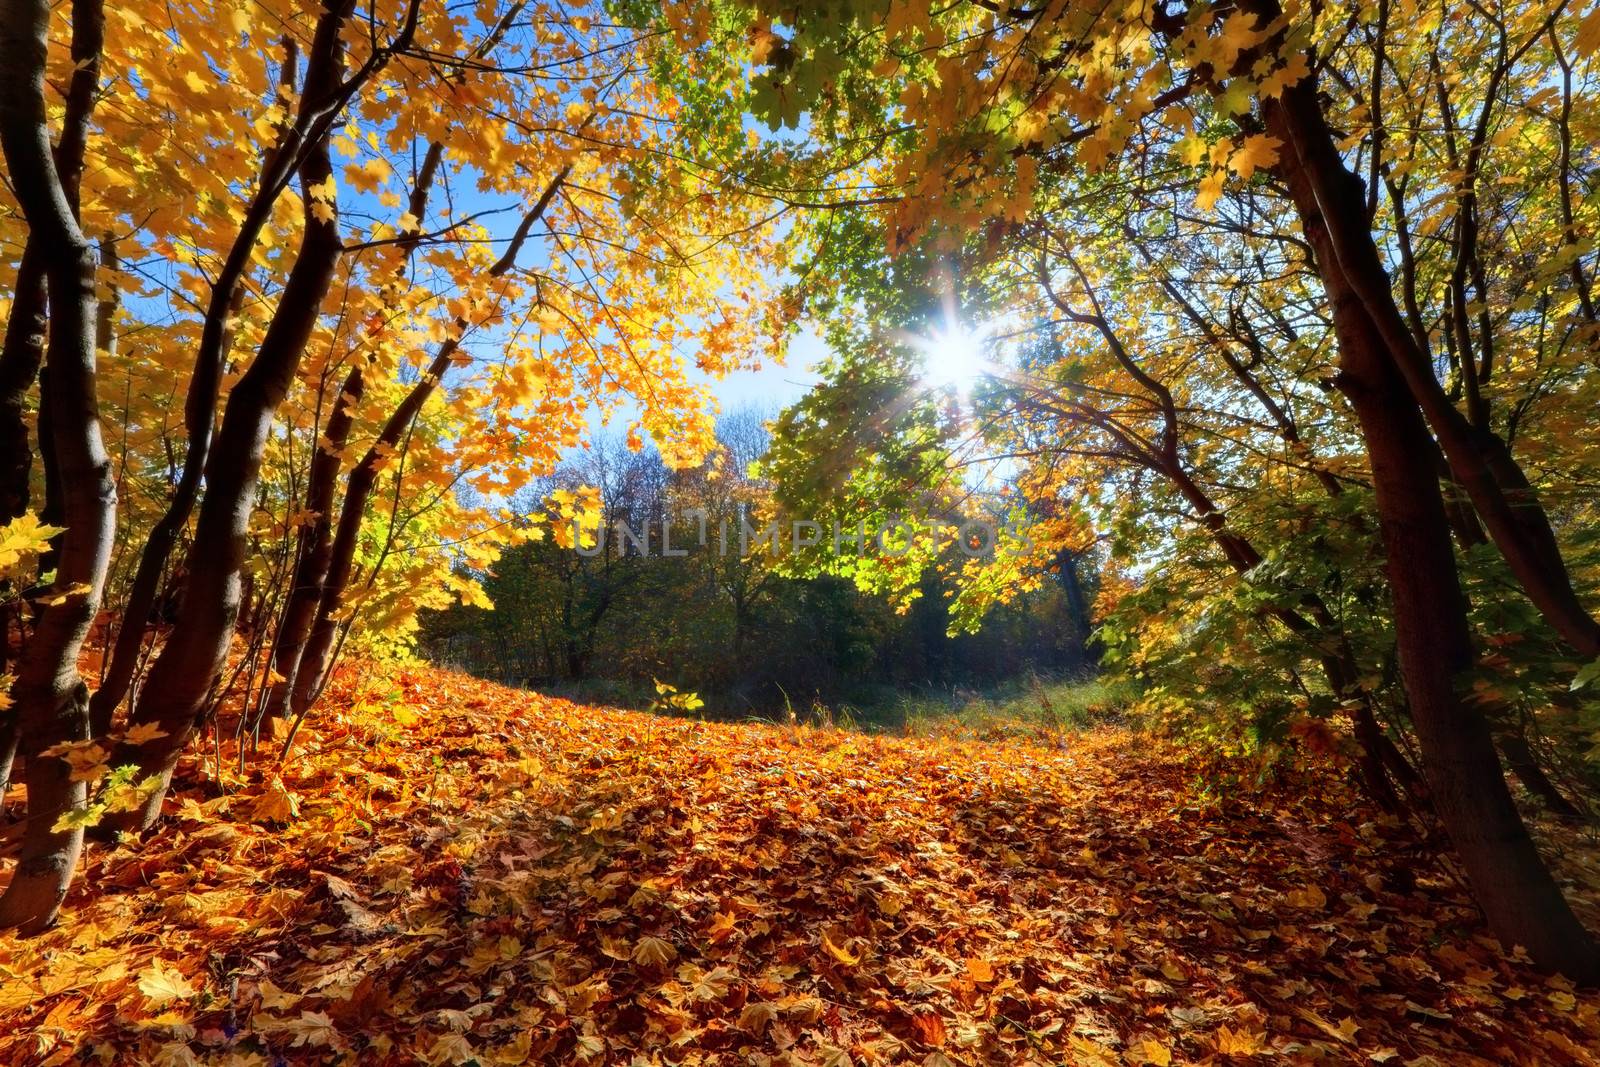 Autumn, fall landscape in forest. Sun shining through colorful leaves, blue sky